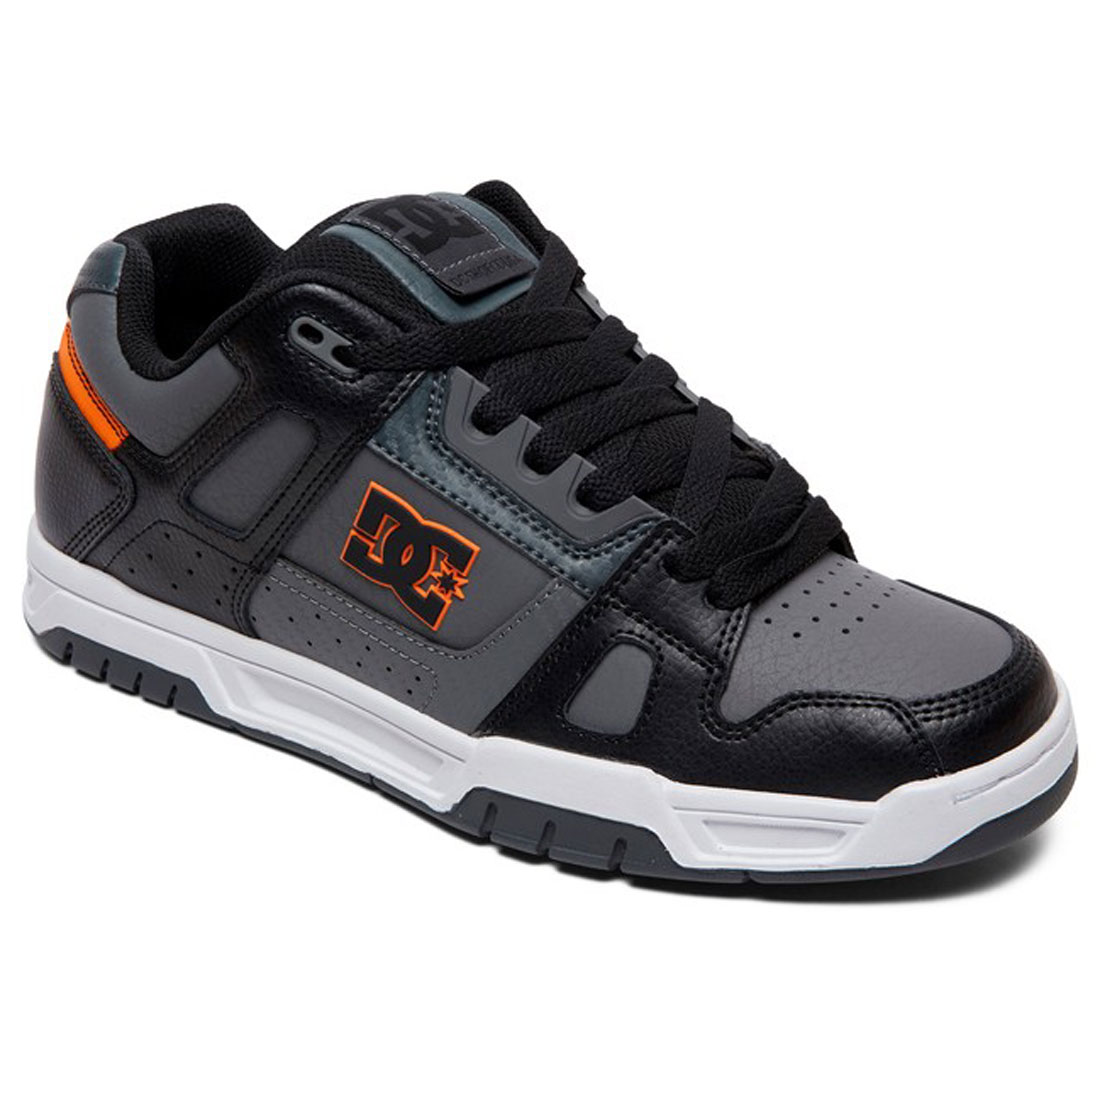 Stag Low Top Sneaker Shoes Gray/Black 